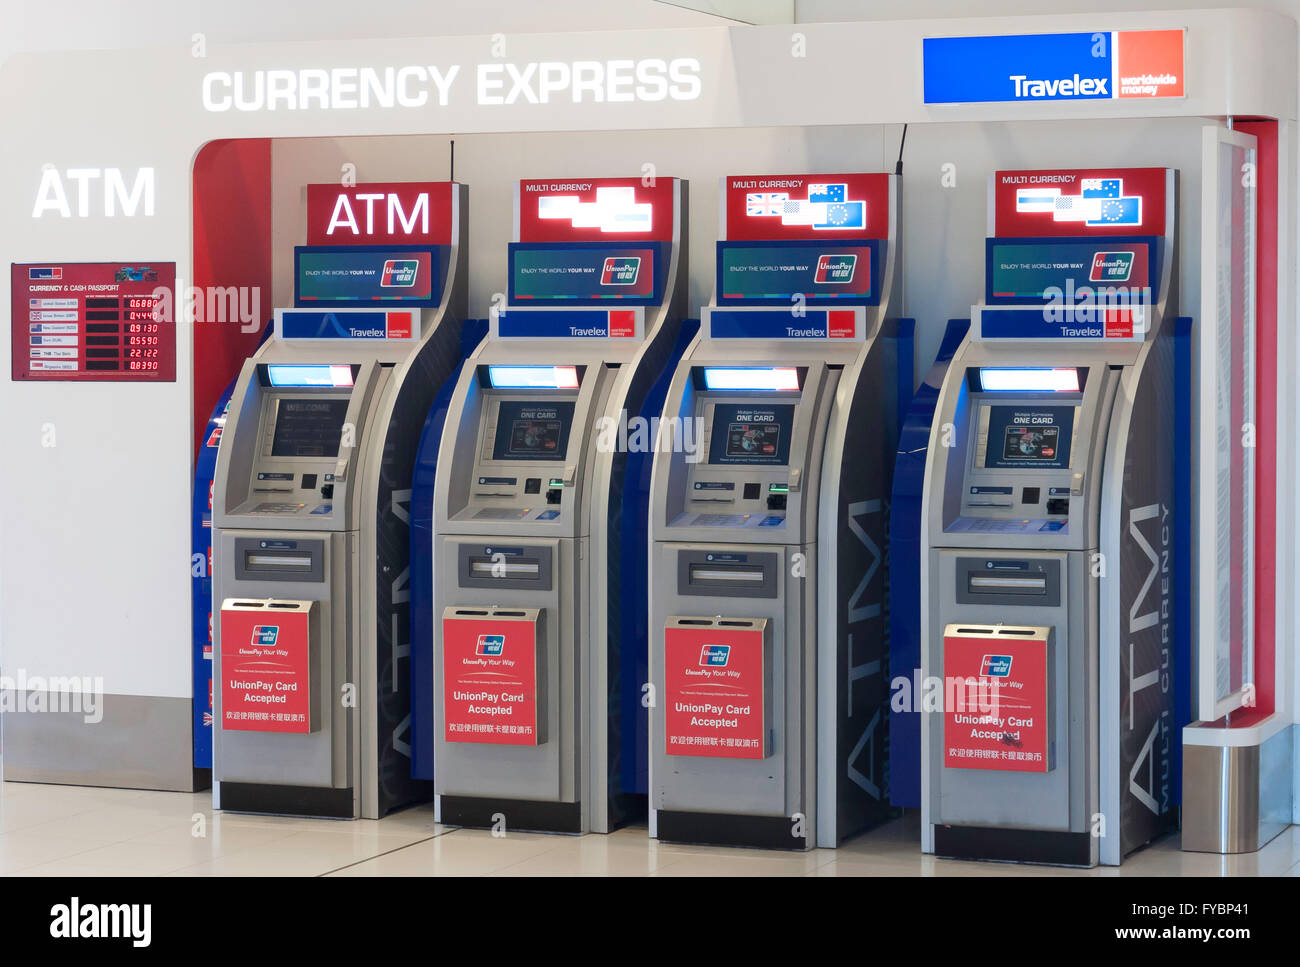 Currency express ATM Machines at gates in Sydney Kingsford Smith Airport, Mascot, Sydney, New South Wales, Australia Stock Photo